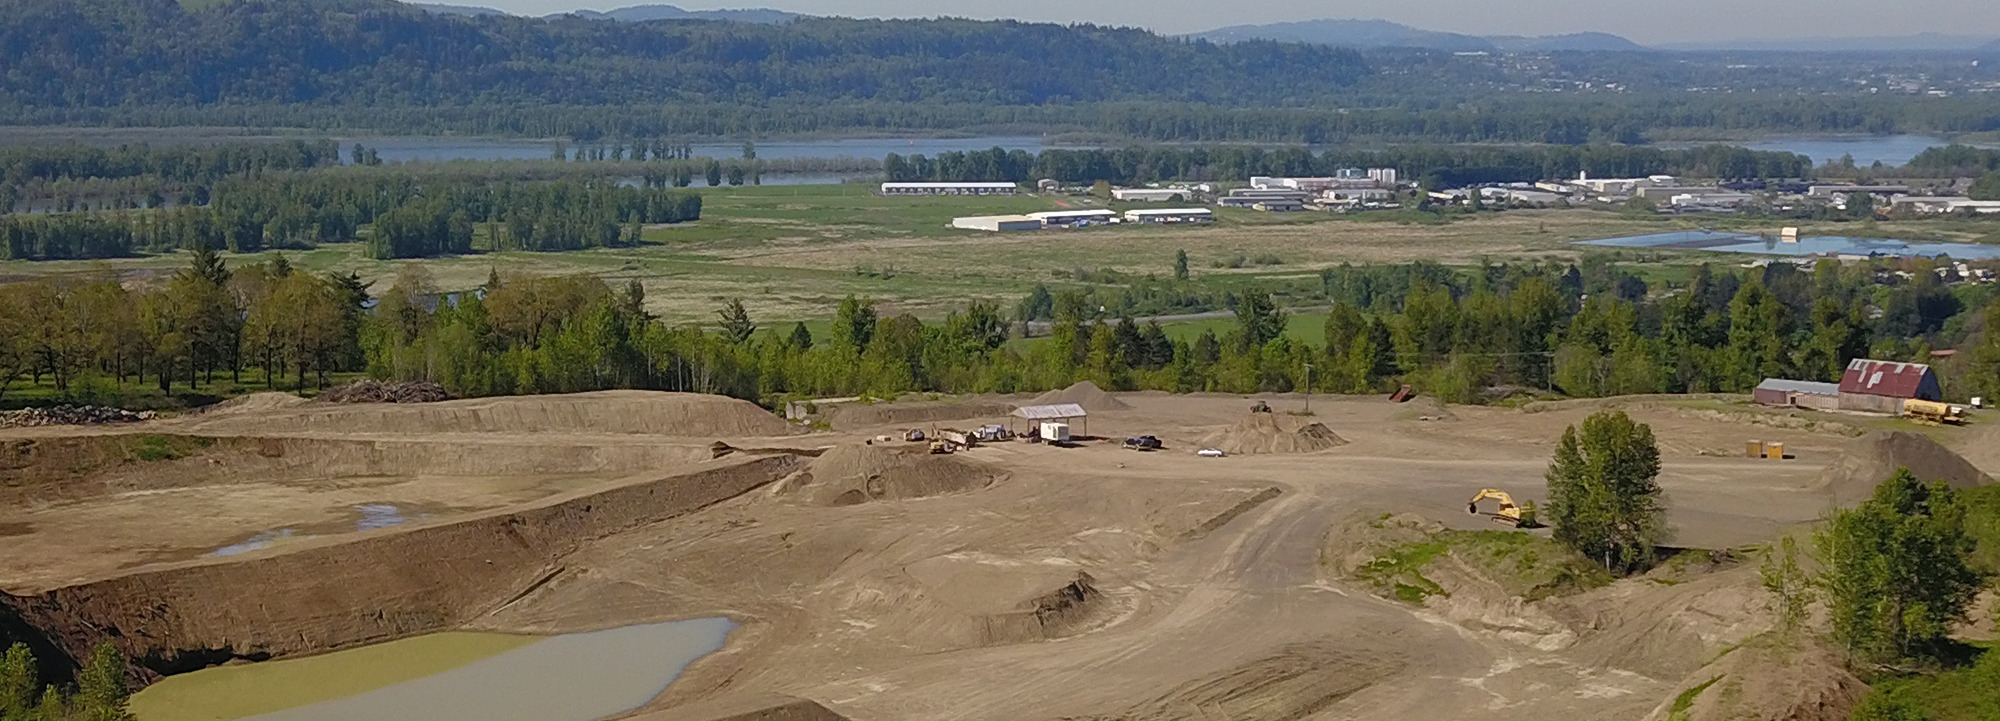 Update on the Zimmerly Quarry: August 2019